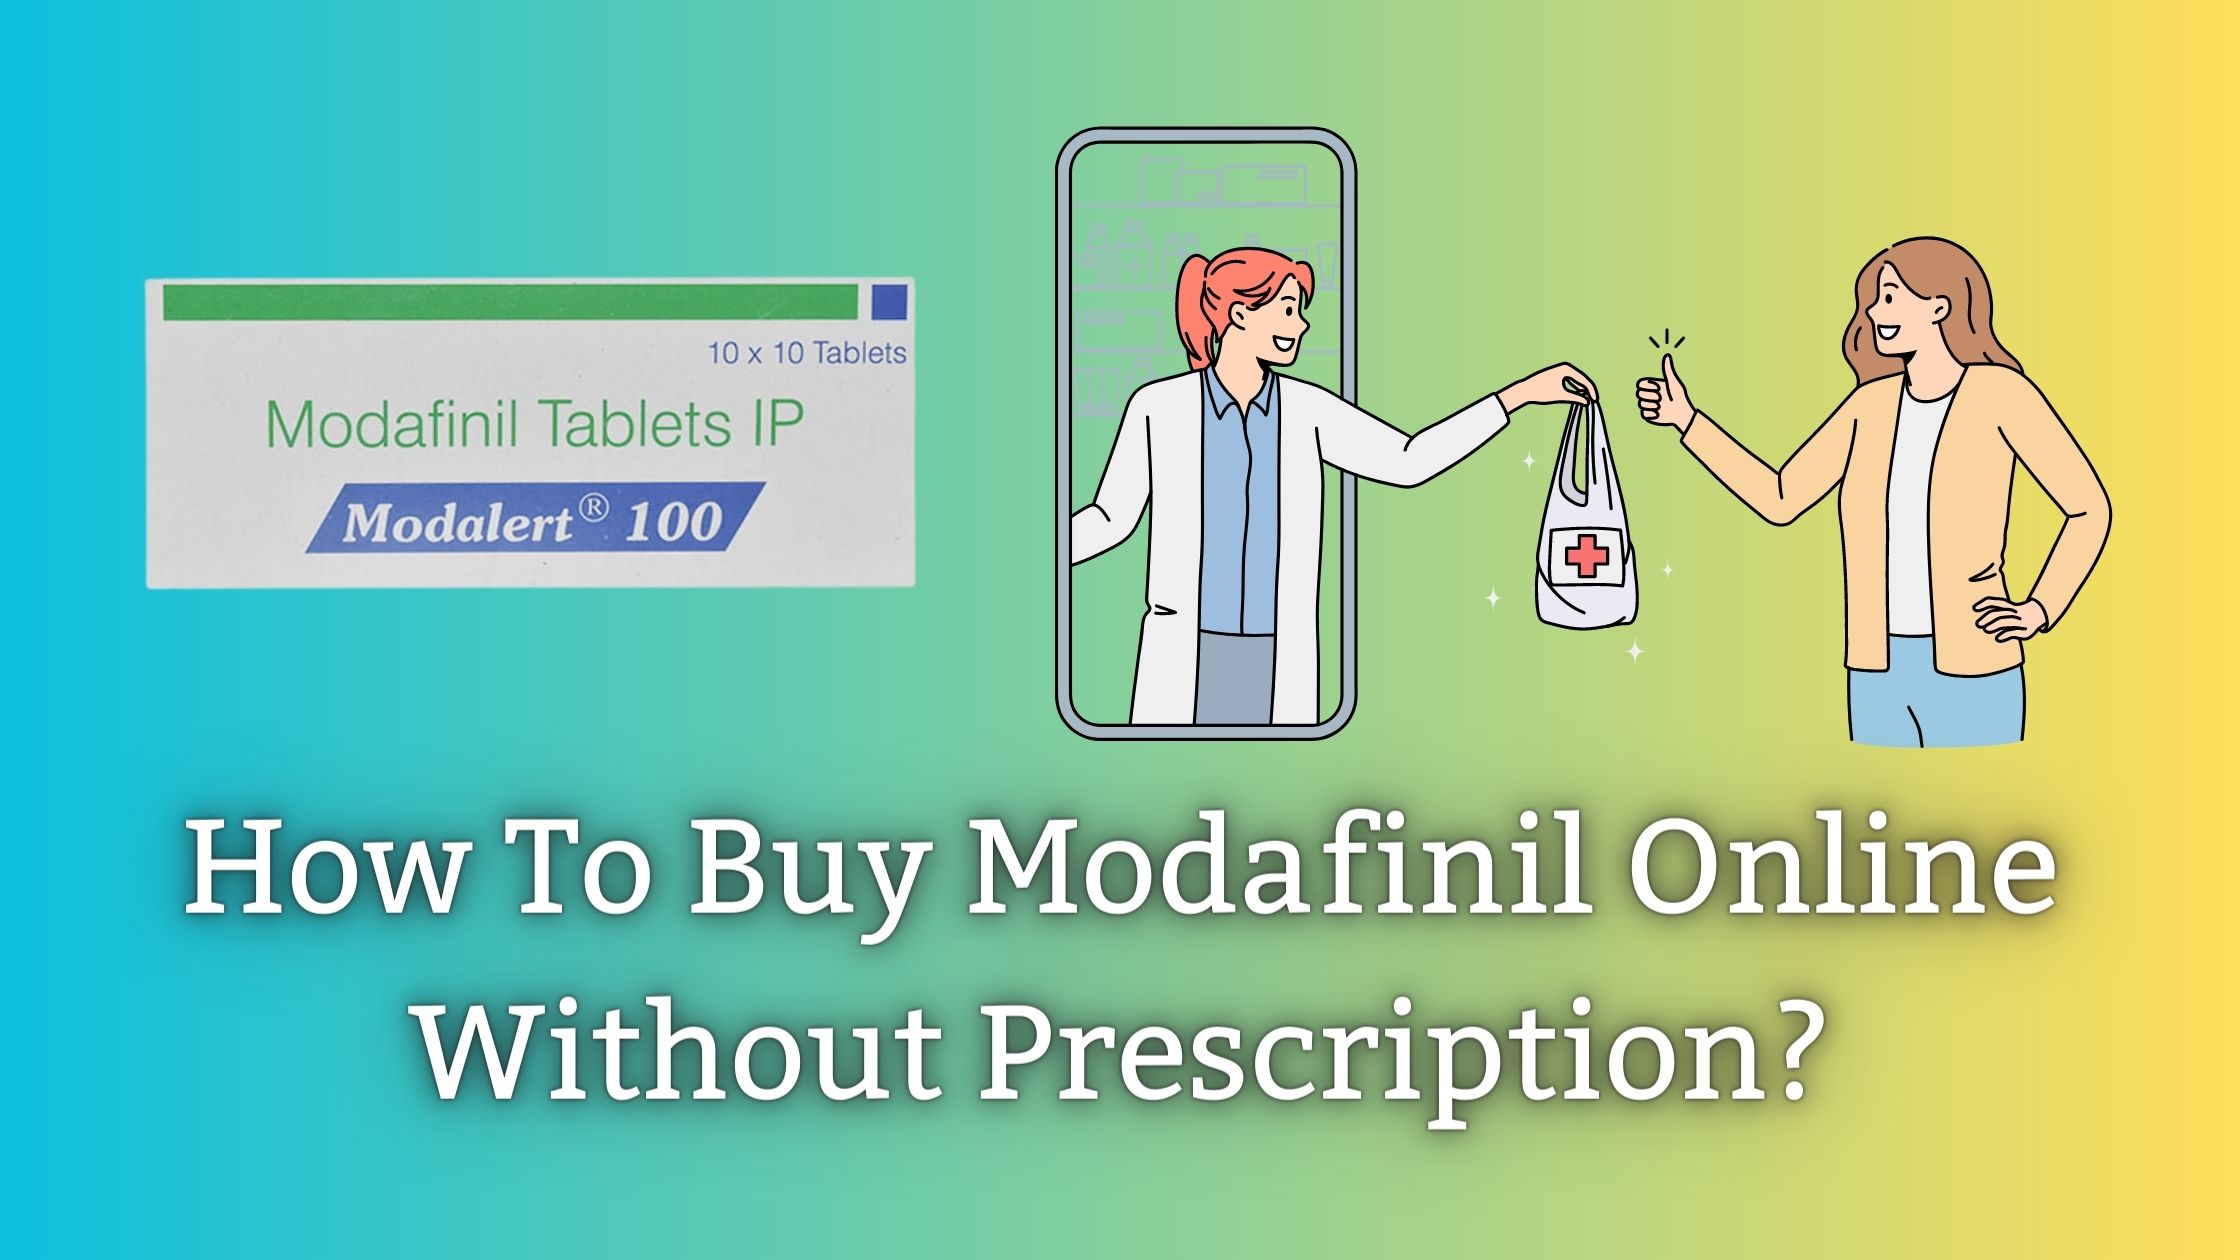 How To Buy Modafinil Online Without Prescription?